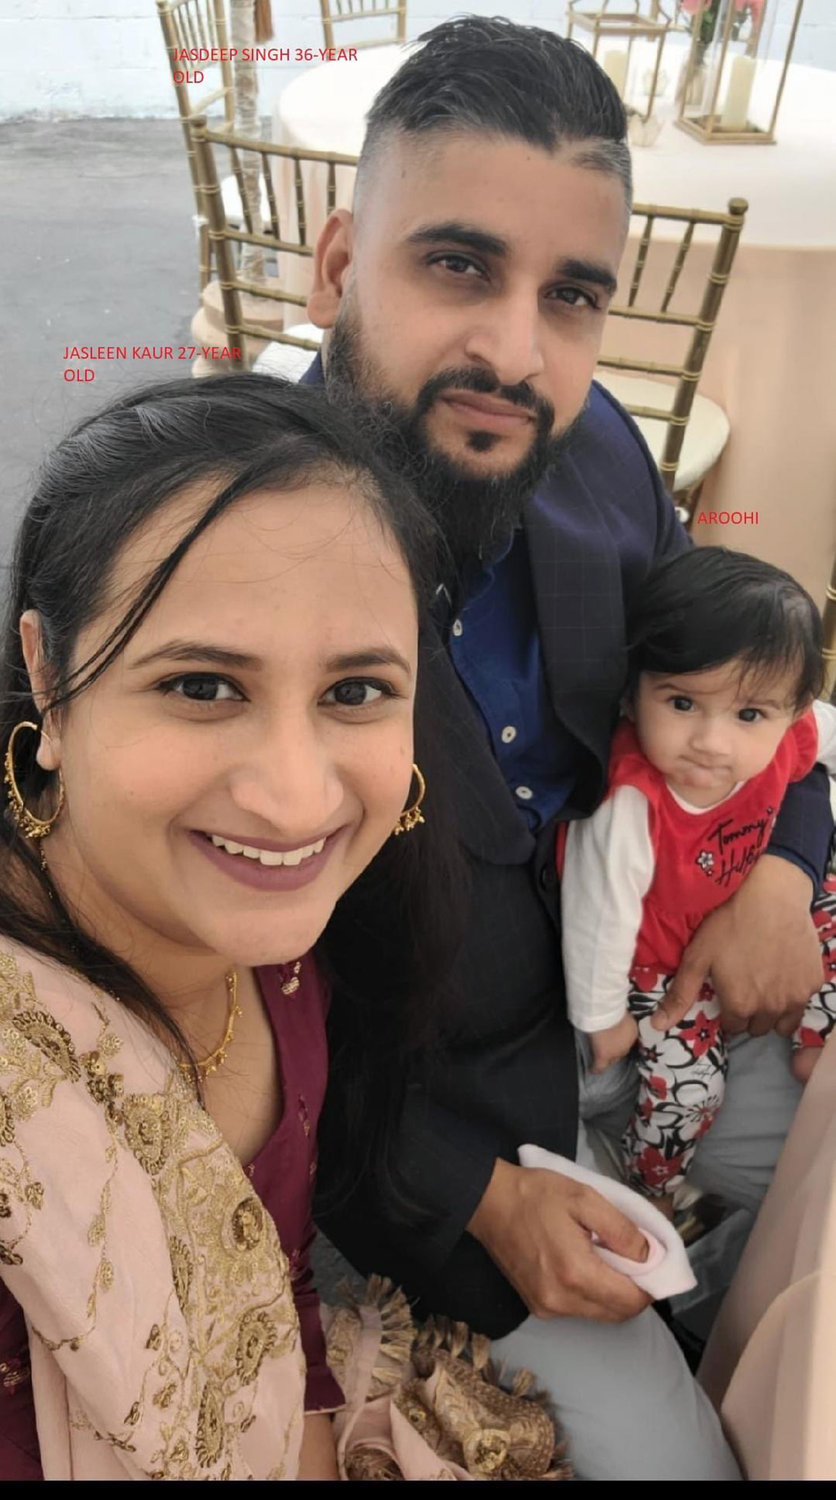 Family photo of Jasleen Kaur, left, Jasdeep Singh and 8-month-old Aroohi Dheri, who were abducted Monday, Oct. 3, 2022, from a business in Merced, California. (Merced County Sheriff's Office/TNS)